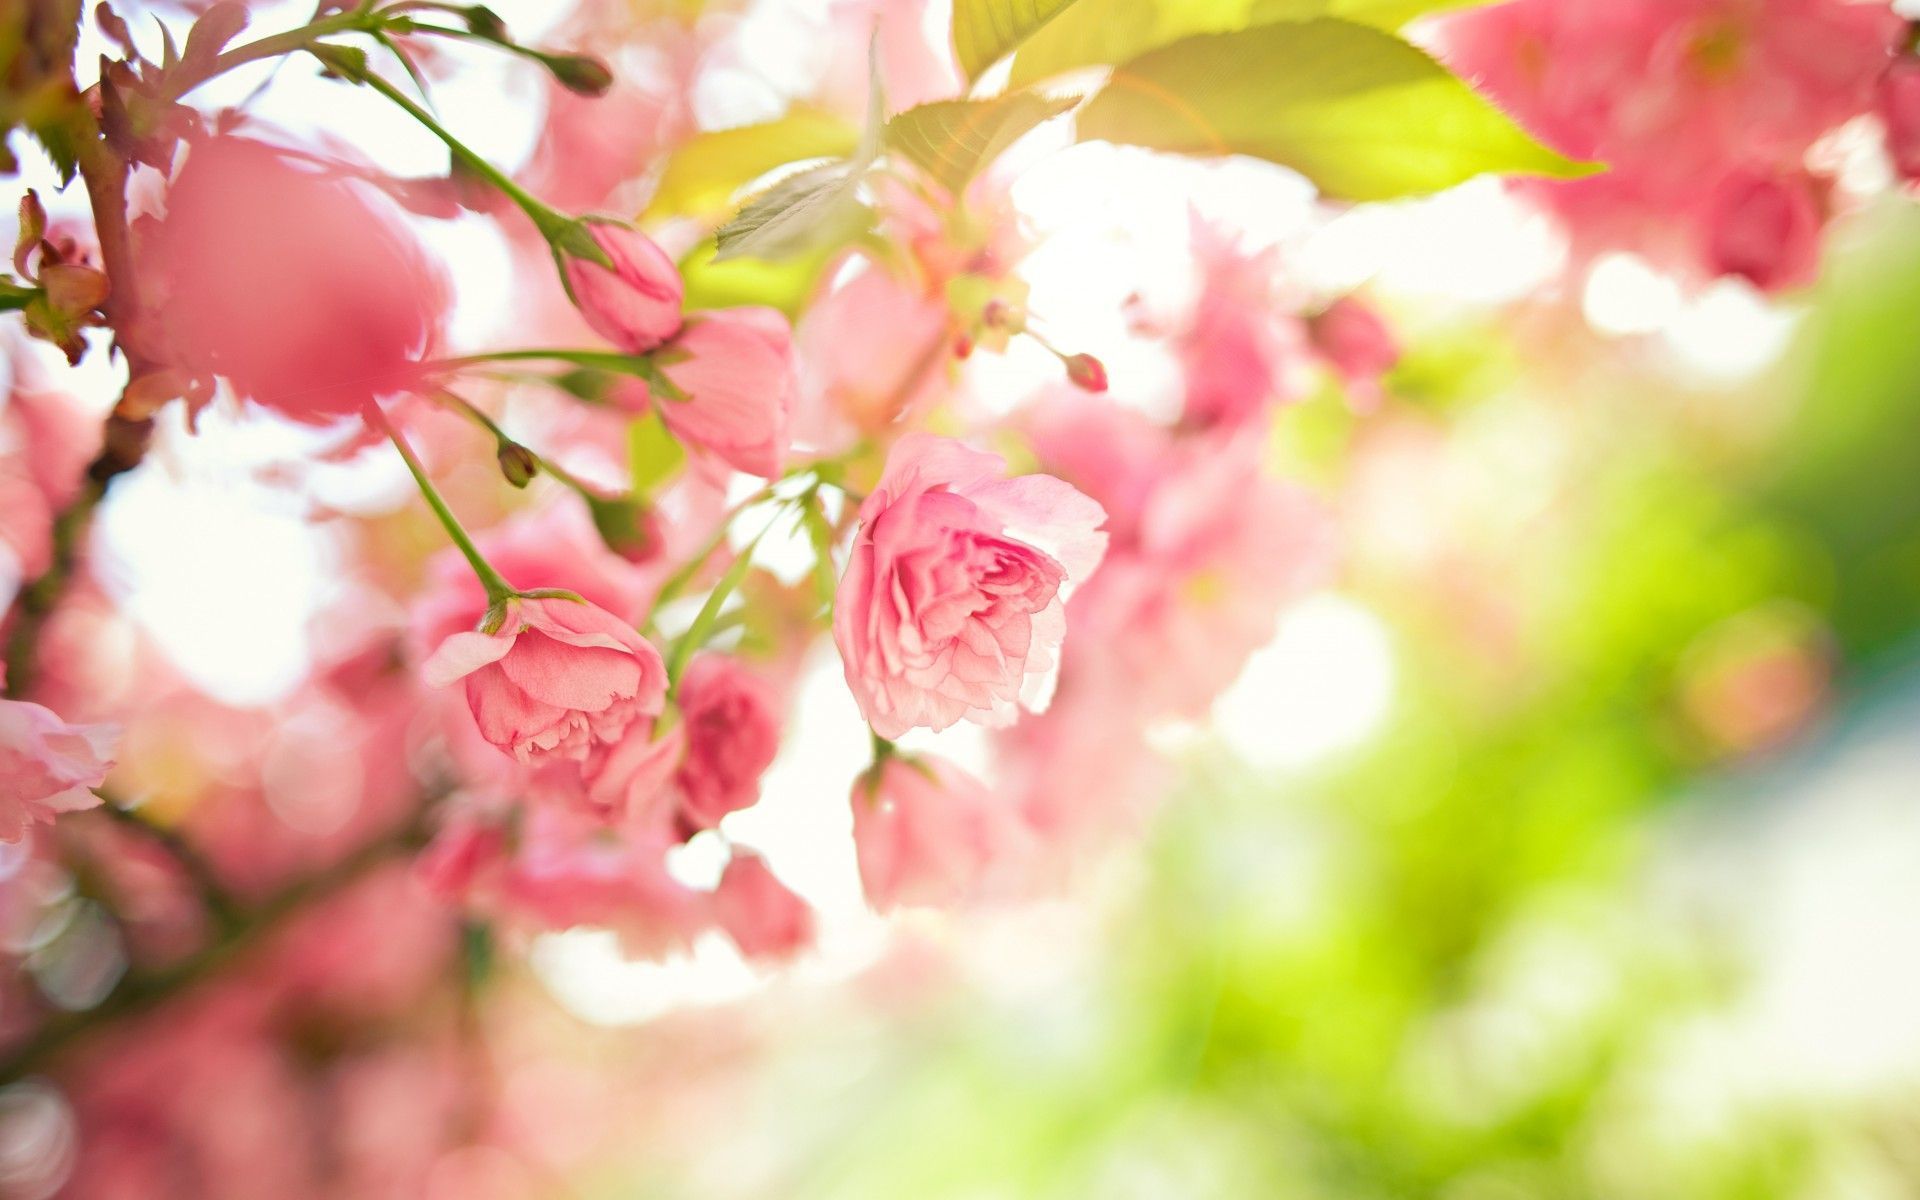 Spring Flowers Wallpapers 7503 - HD Wallpapers Site